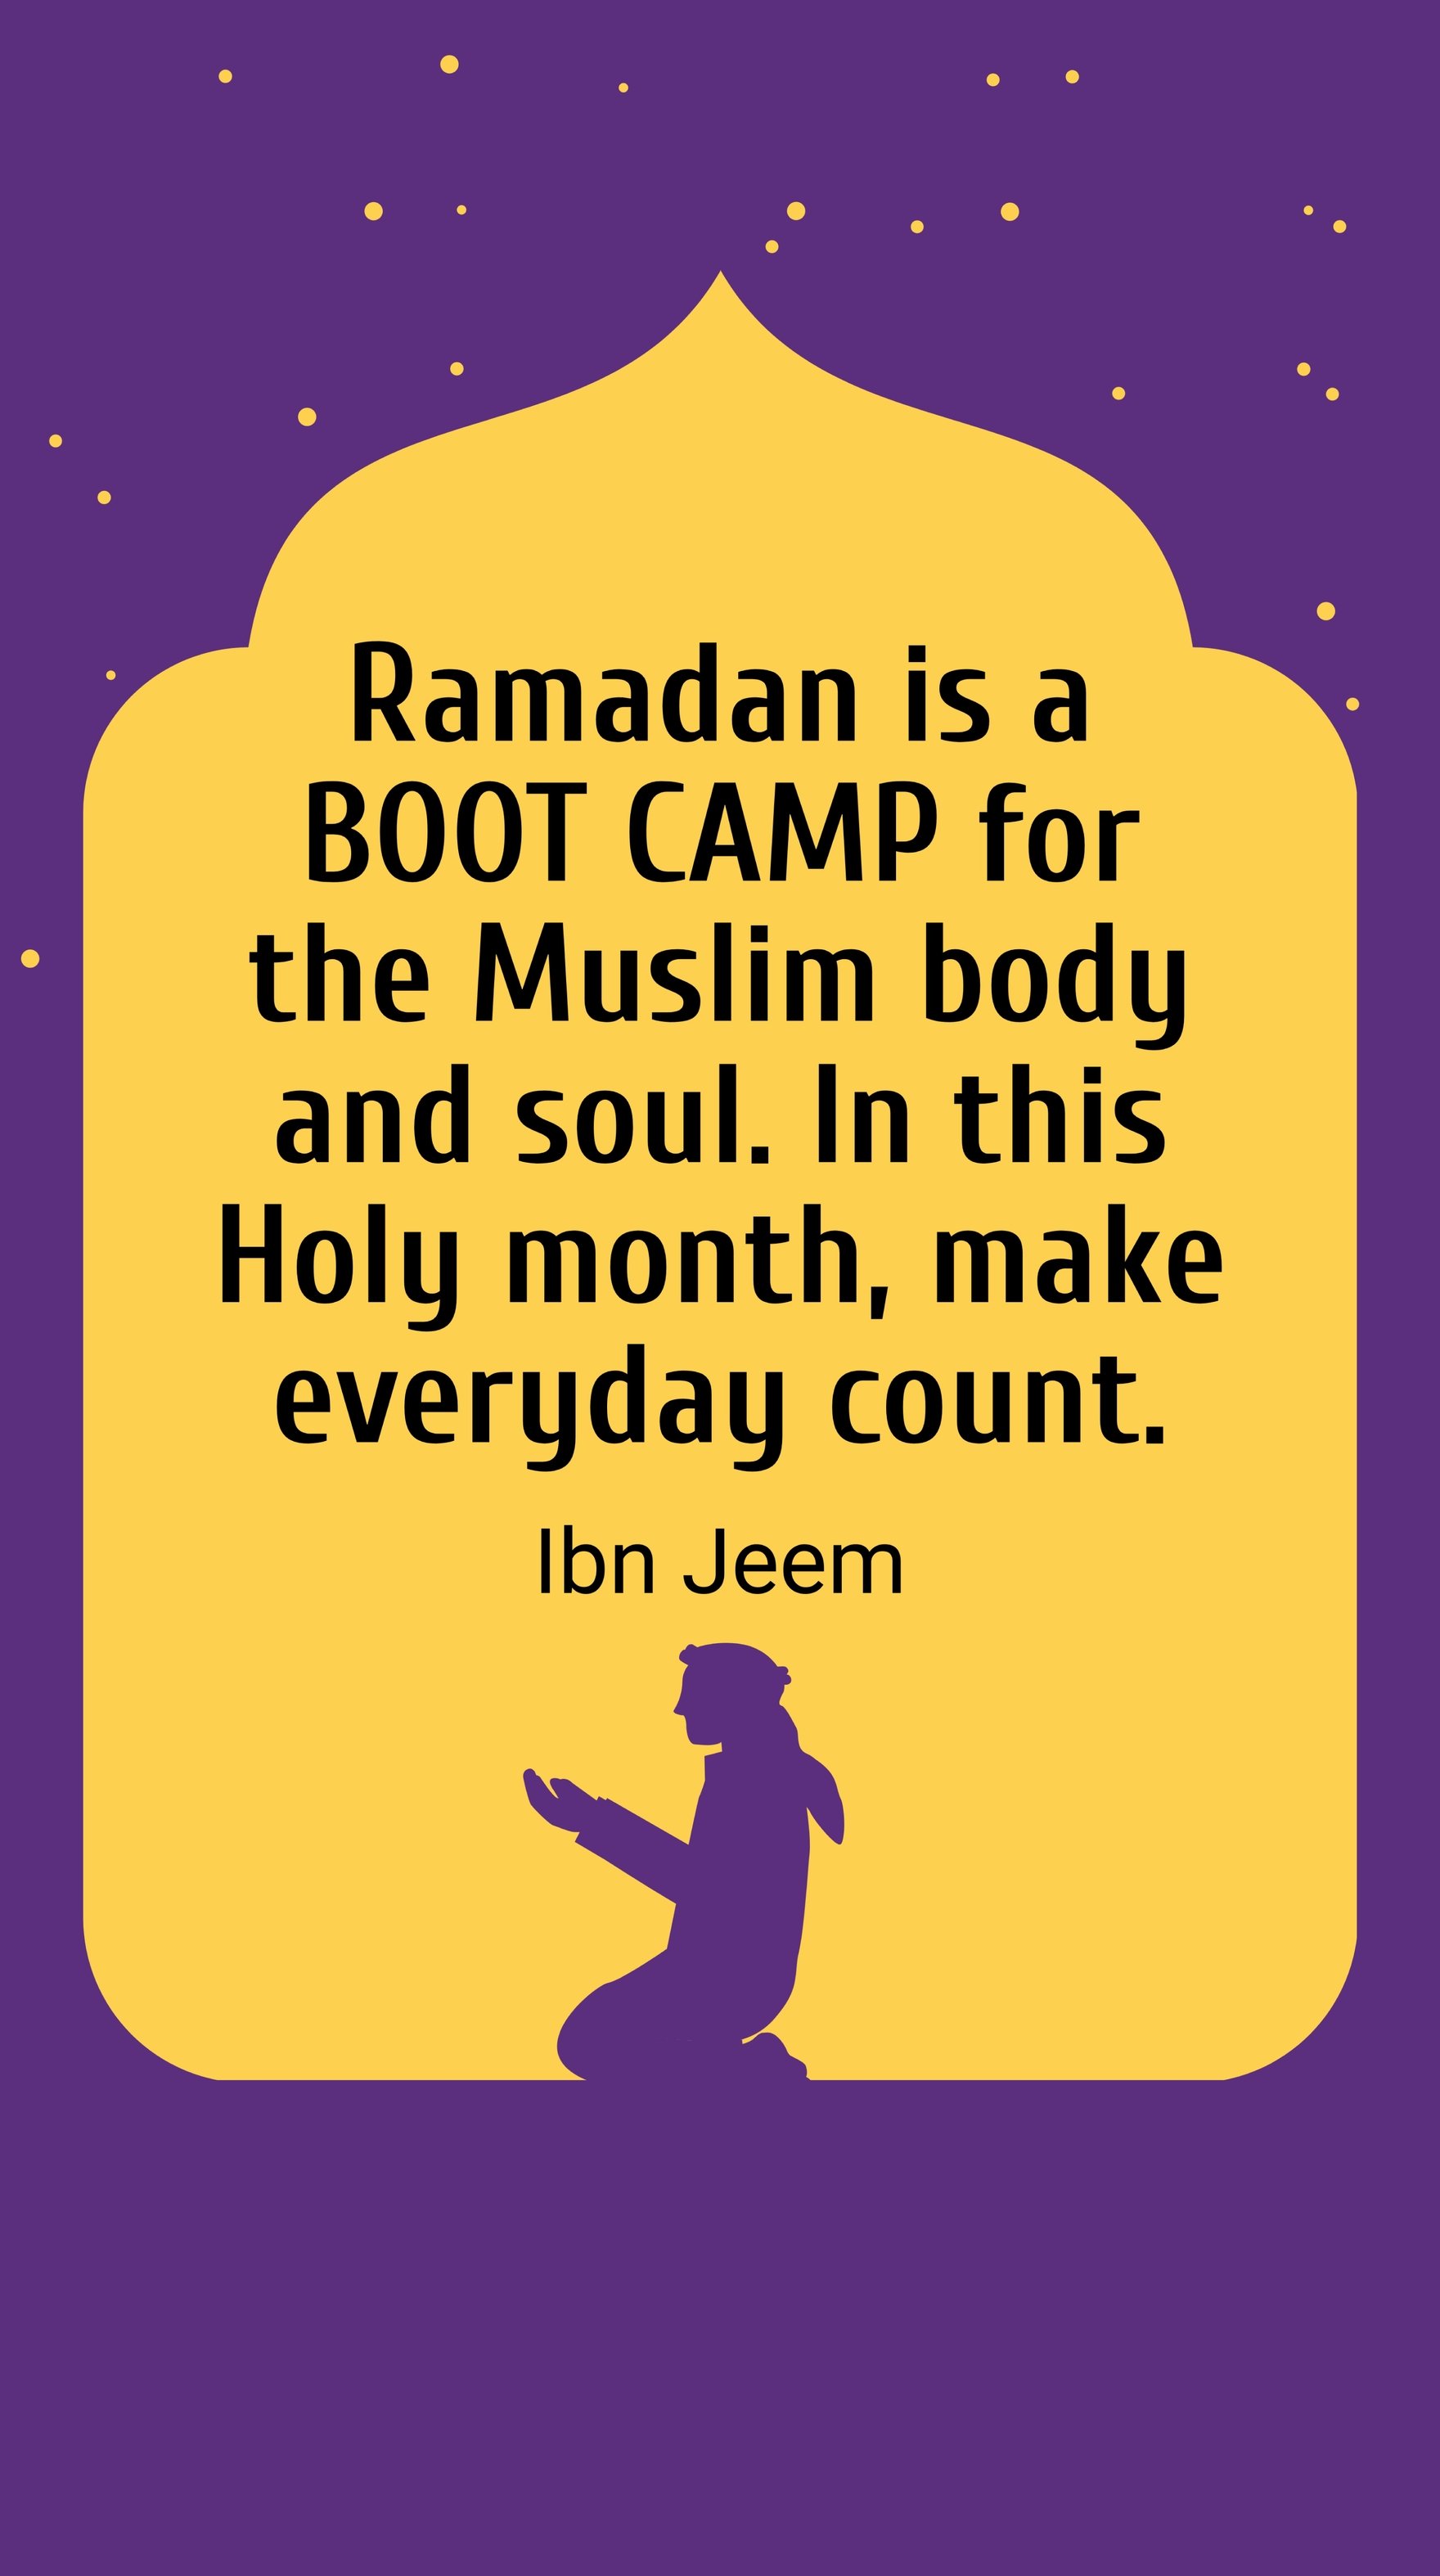 Free Ibn Jeem - Ramadan is a BOOT CAMP for the Muslim body and soul. In this Holy month, make everyday count. in JPG